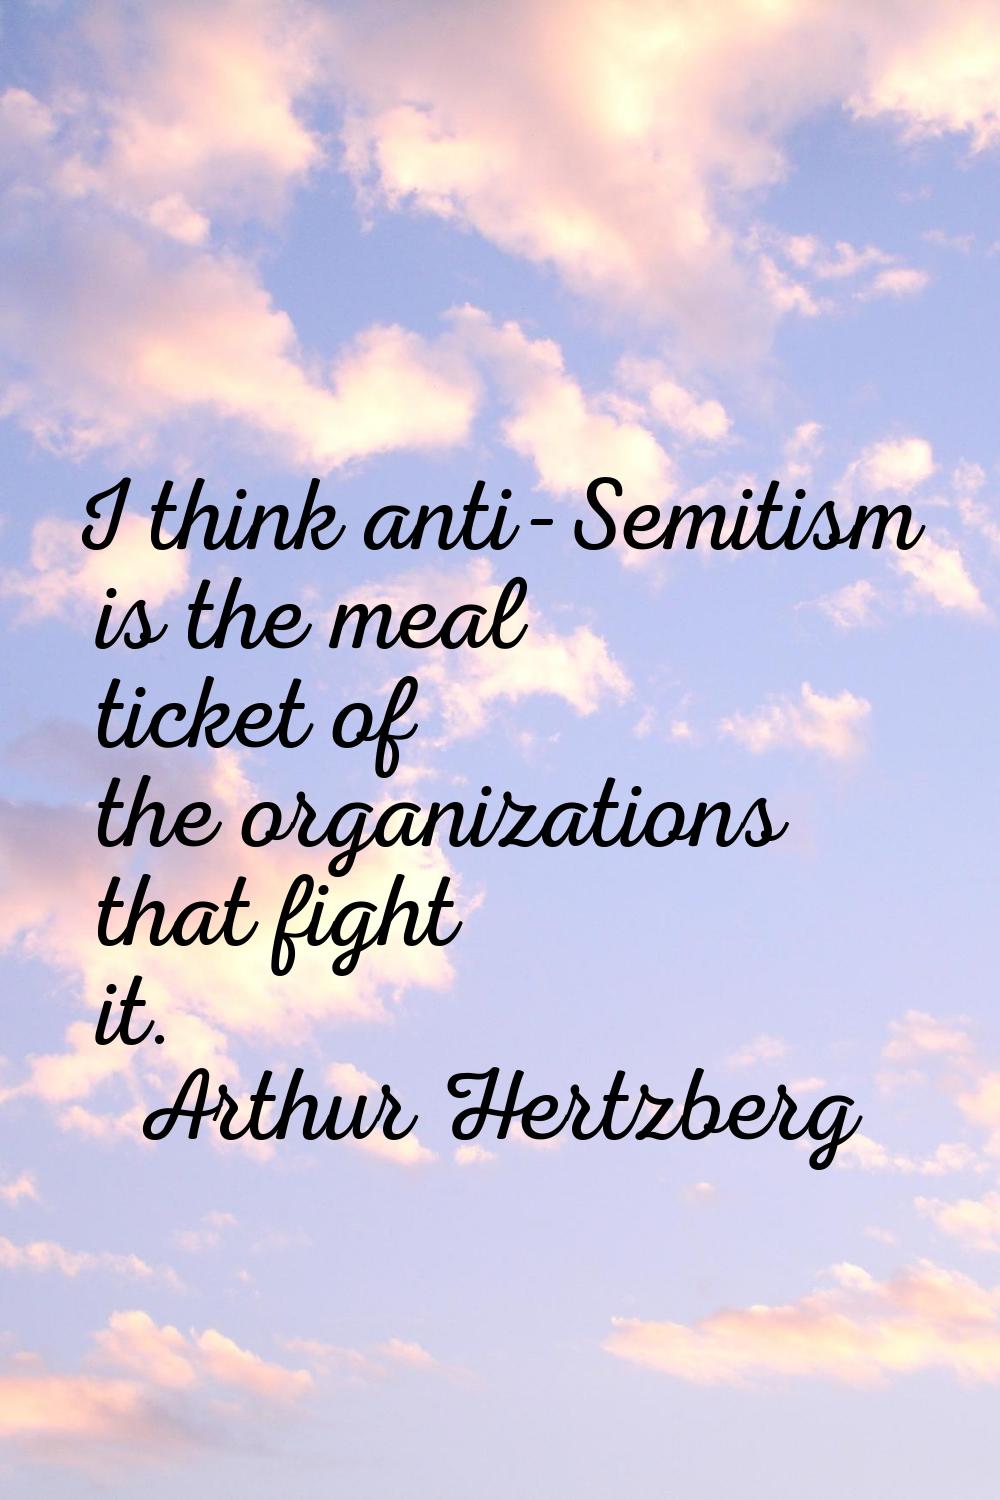 I think anti-Semitism is the meal ticket of the organizations that fight it.